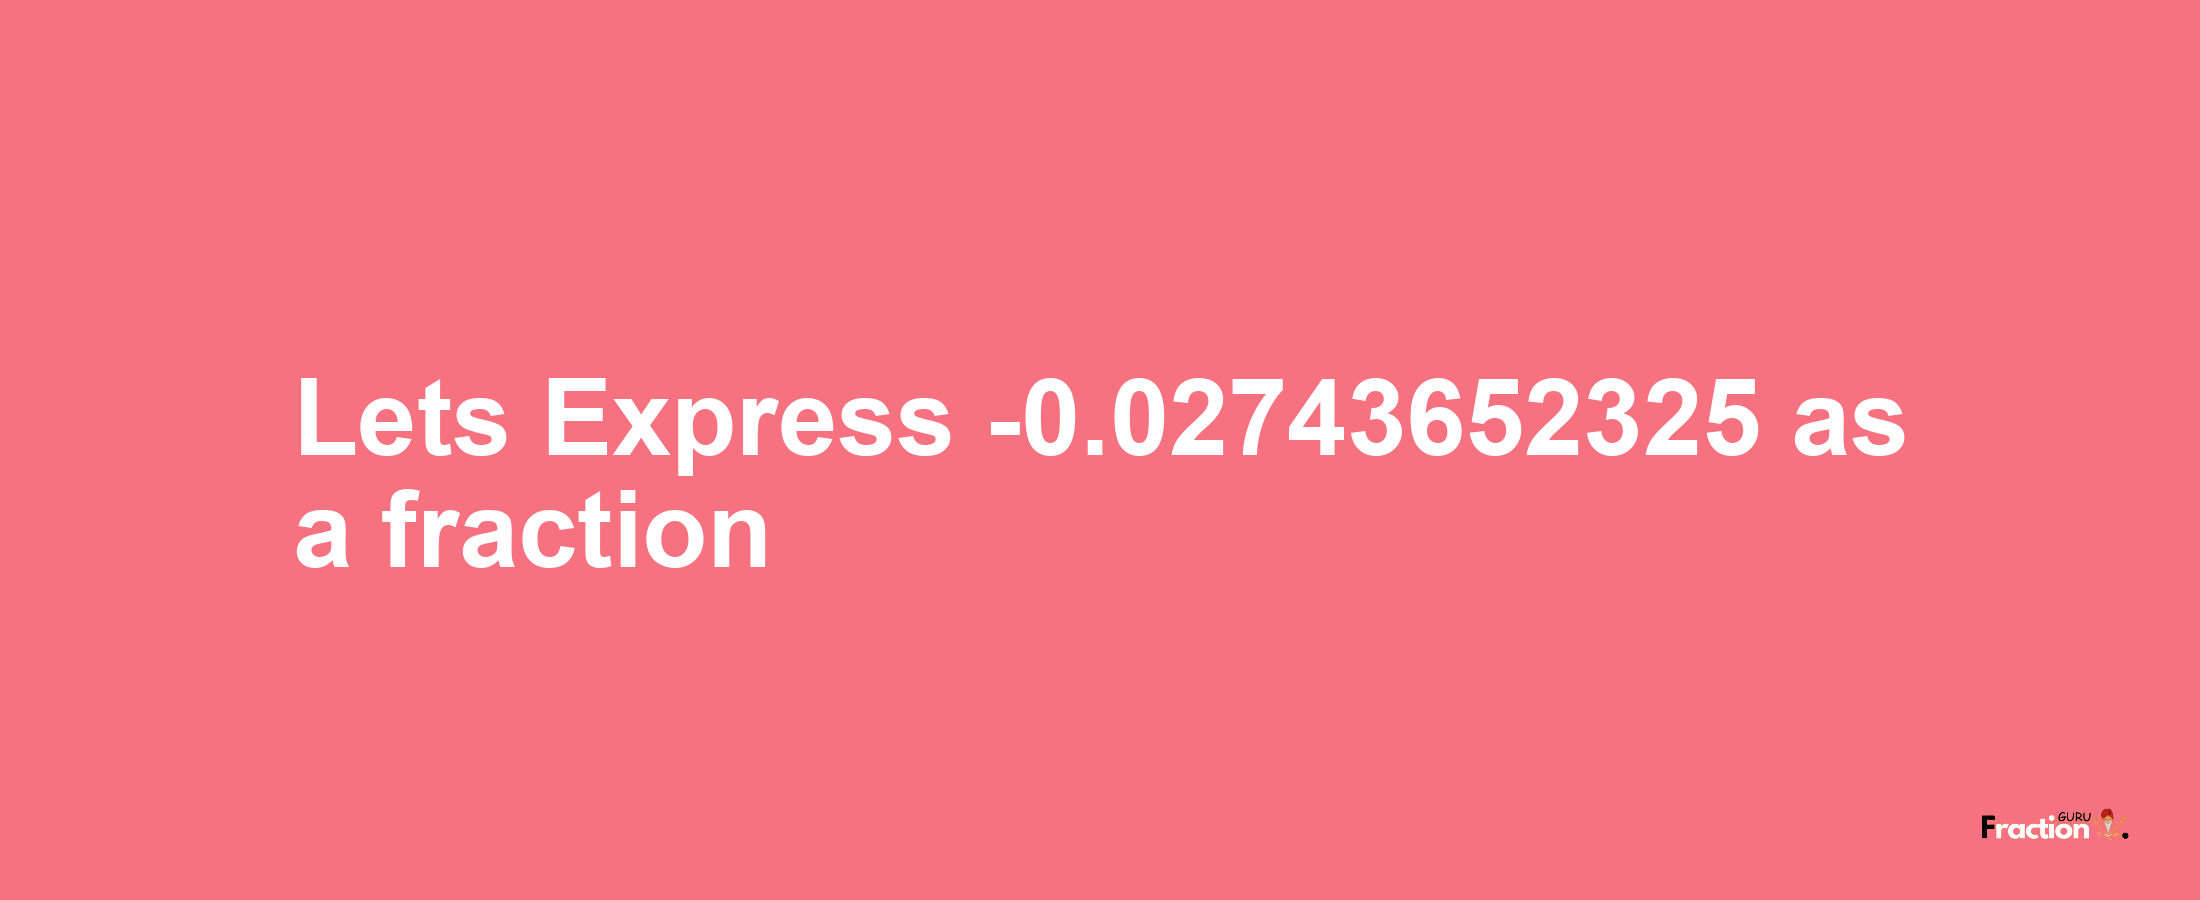 Lets Express -0.02743652325 as afraction